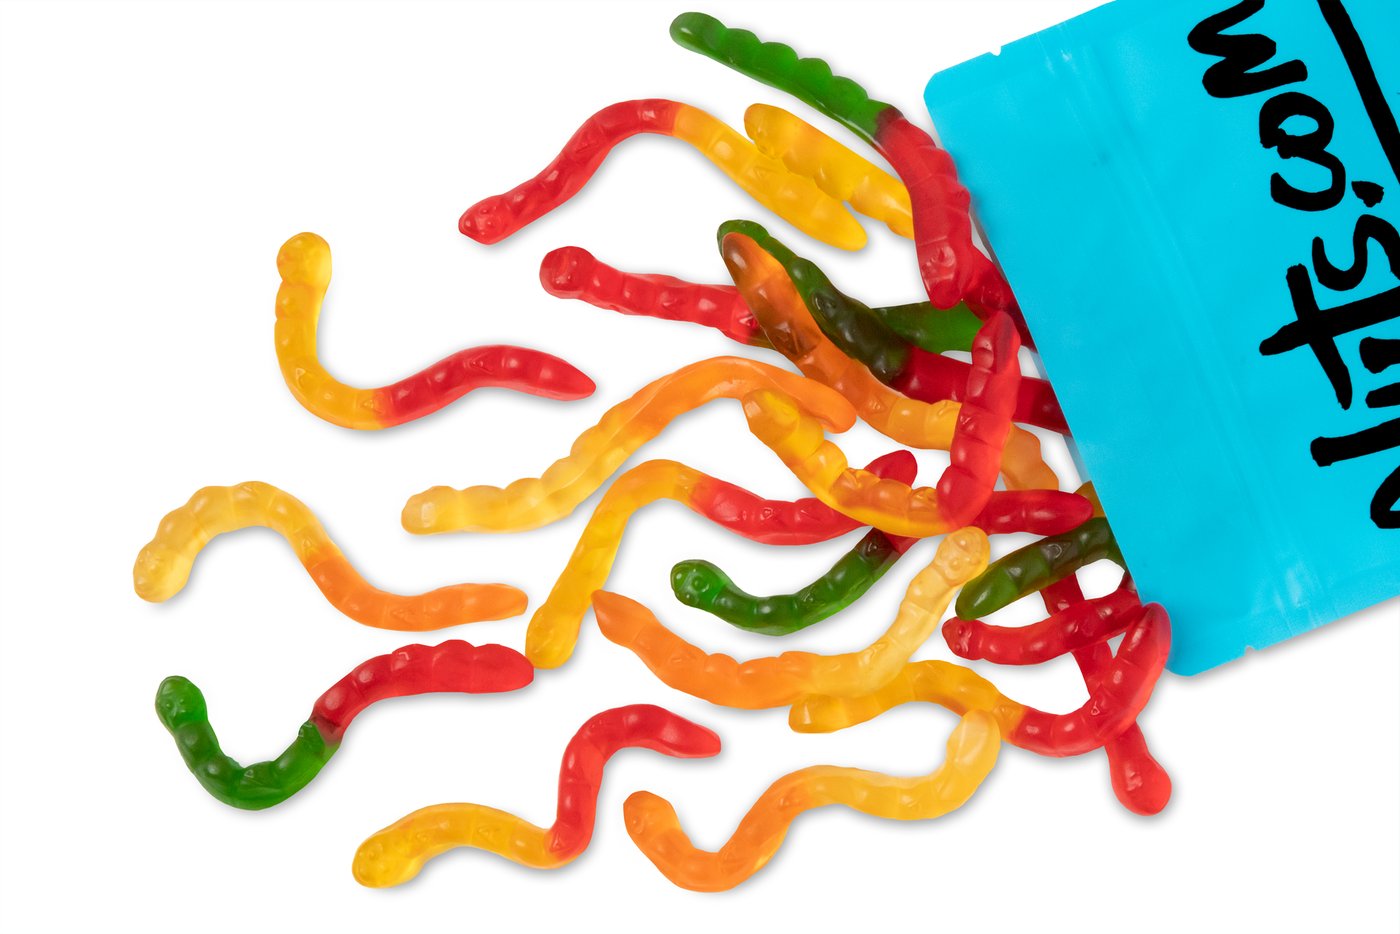 gummy worms package